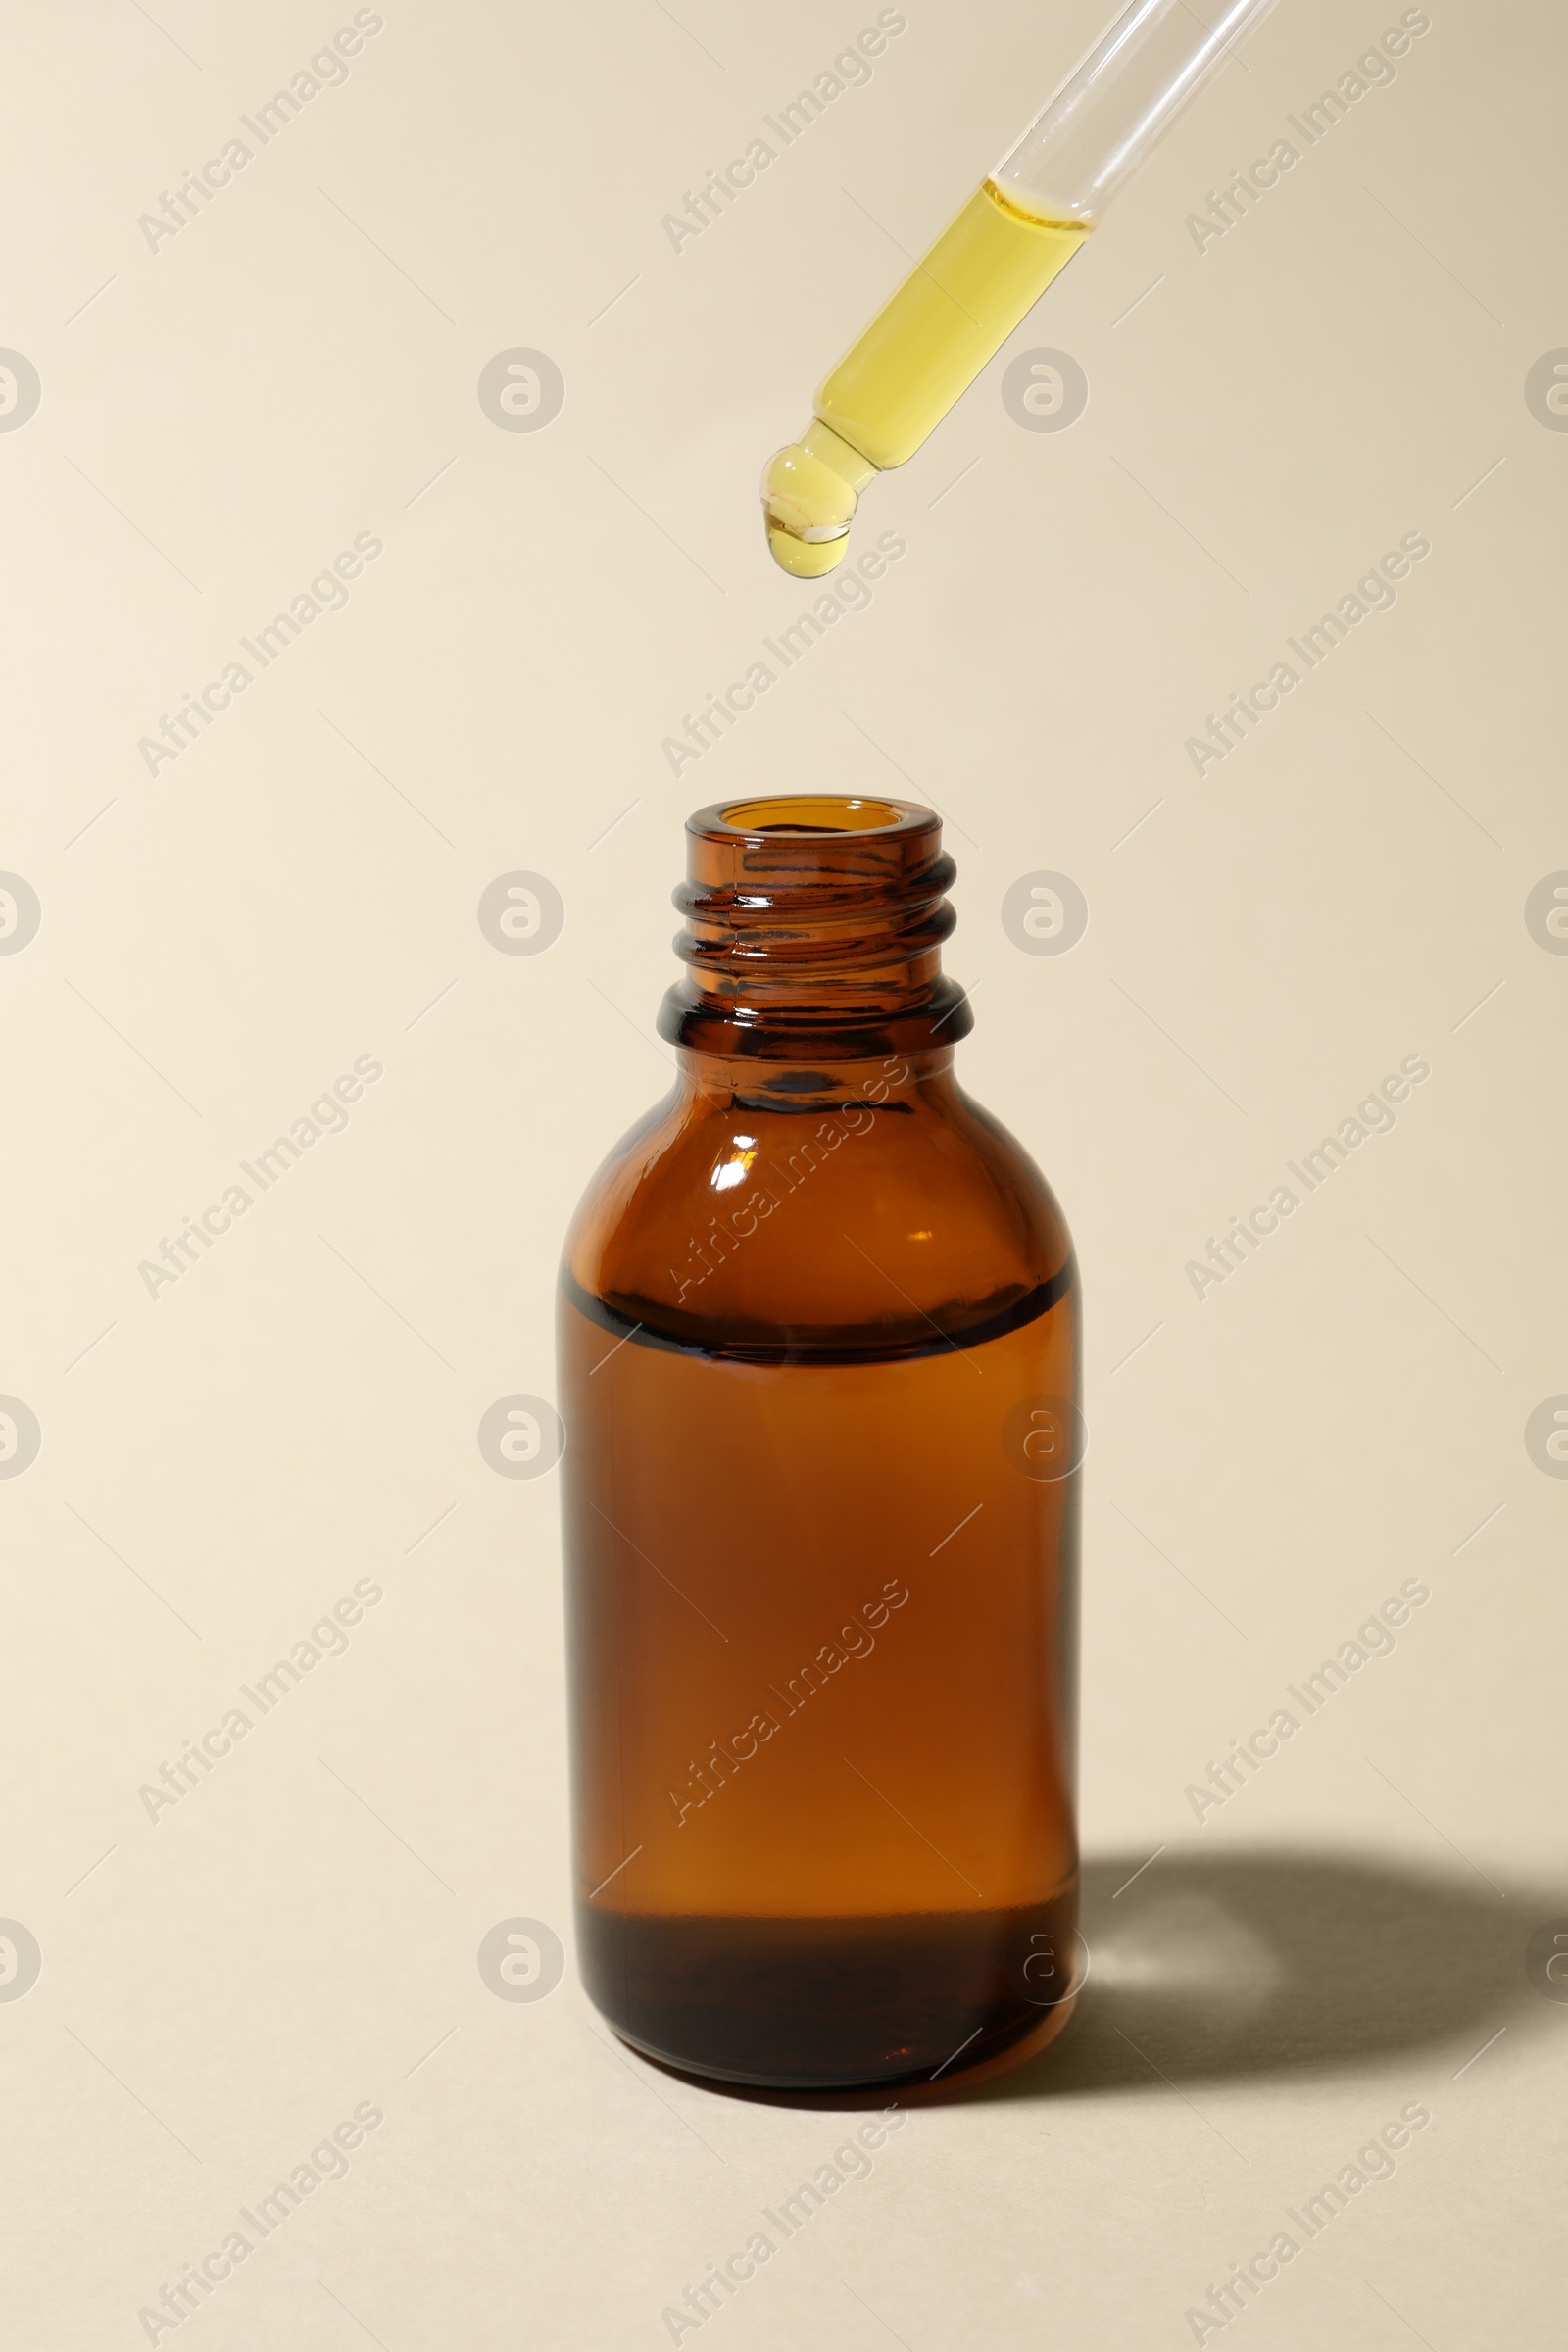 Photo of Dripping cosmetic oil from pipette into bottle on beige background